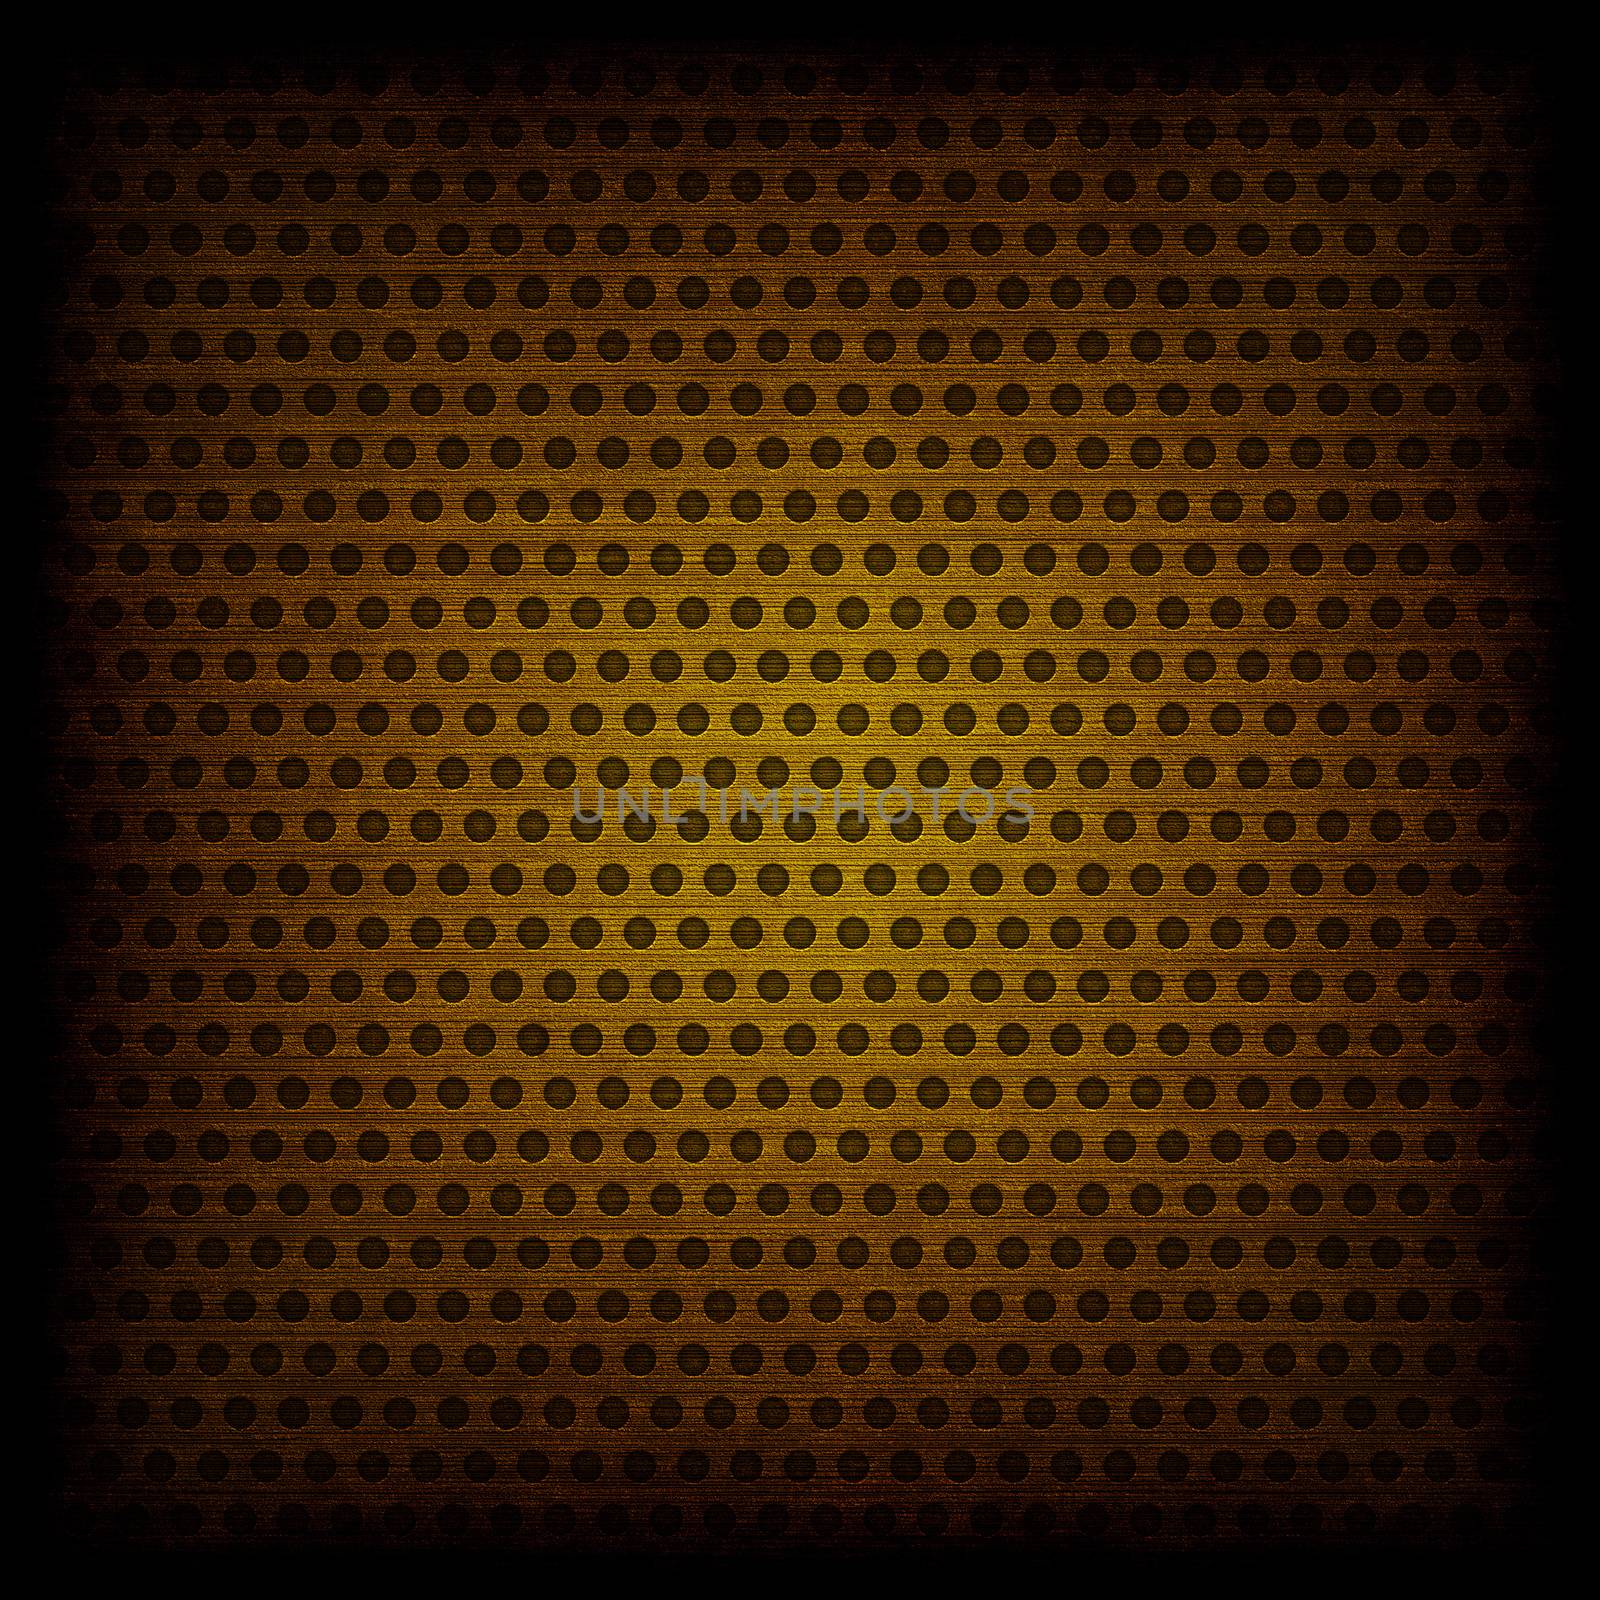 Gold circle pattern texture or background